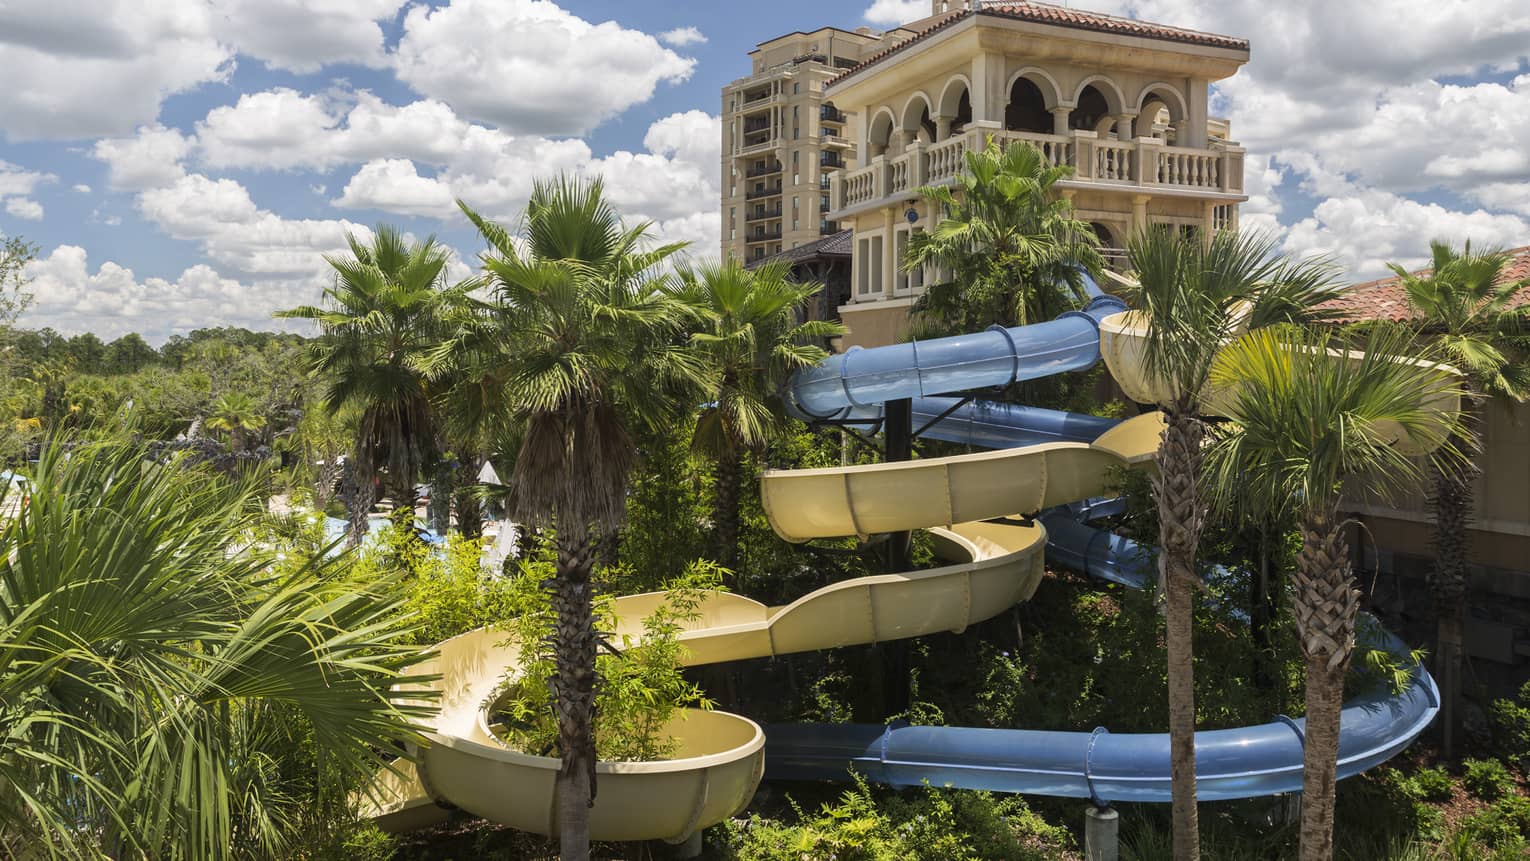 Building over winding outdoor water slide, palm trees